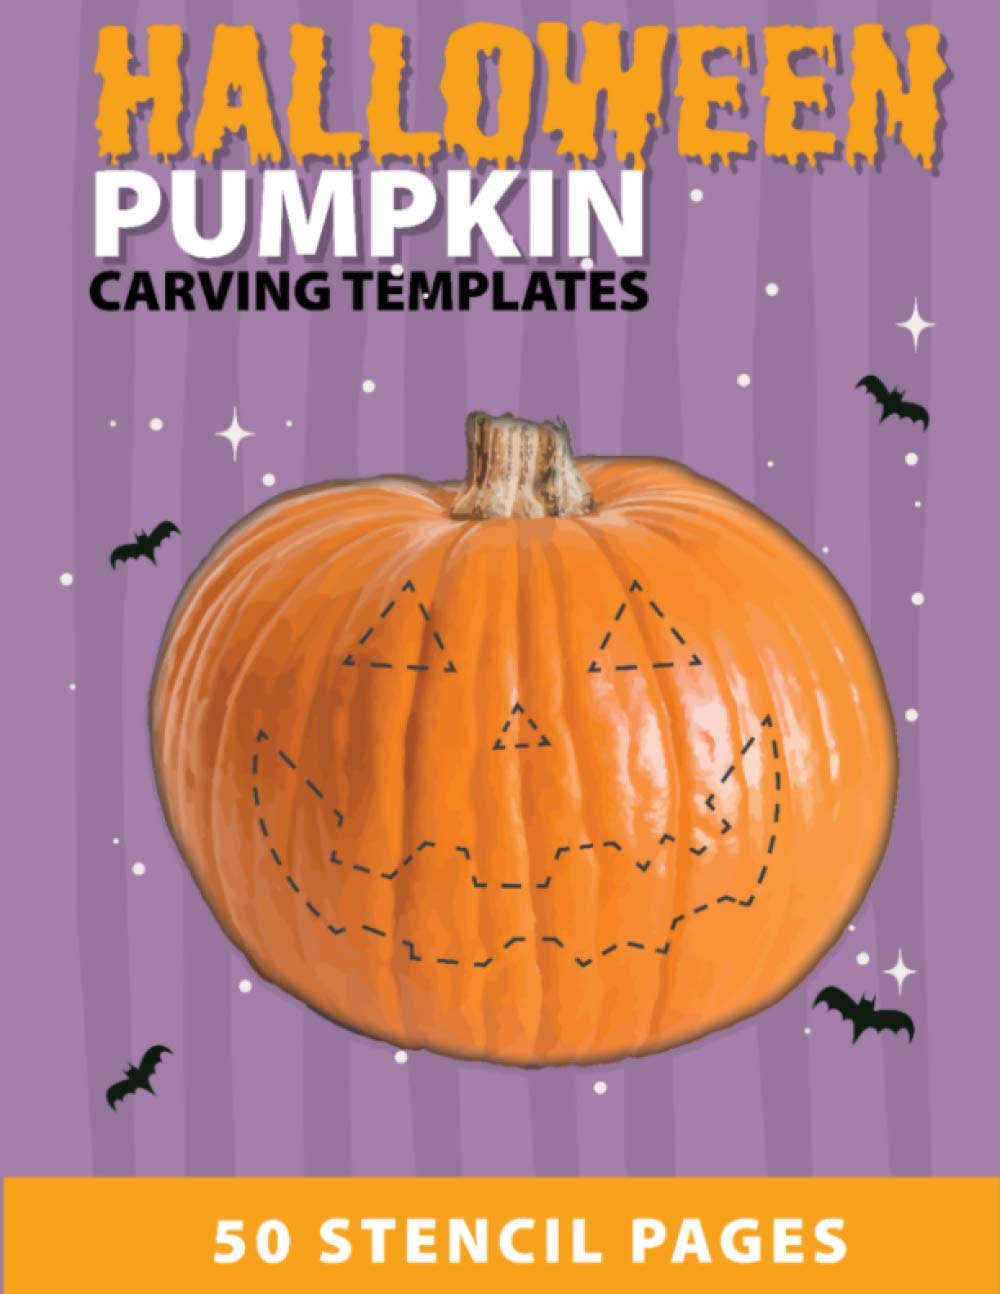 Halloween Pumpkin Carving Templates 50 Stencil Pages: kids pumpkin stencils and carving book Full with funny and scary pumpkin faces Patterns & templa